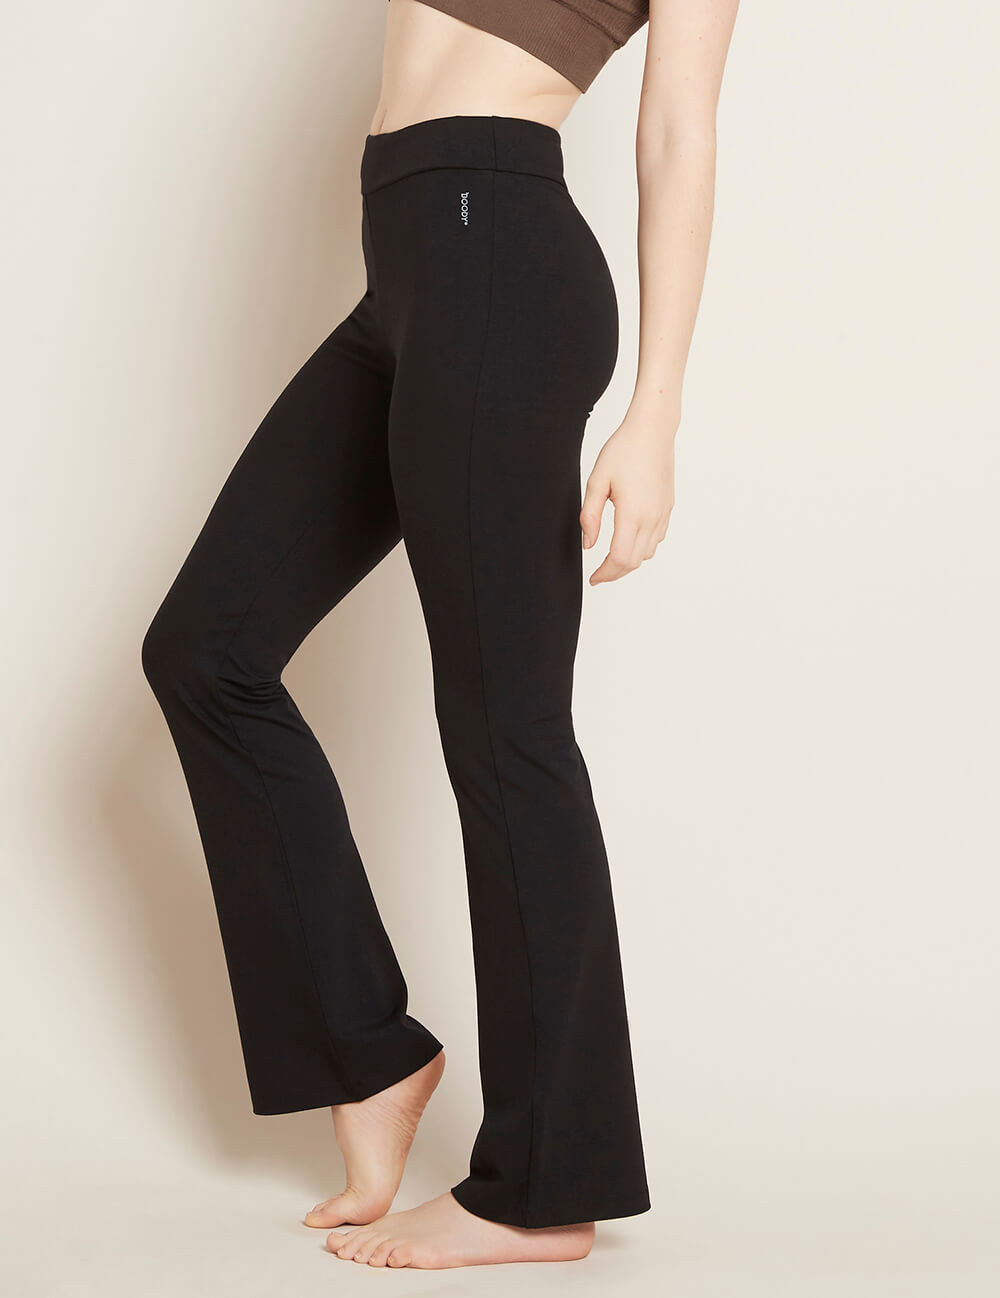 Boody Women's High Waist Flare Pant in Black Side